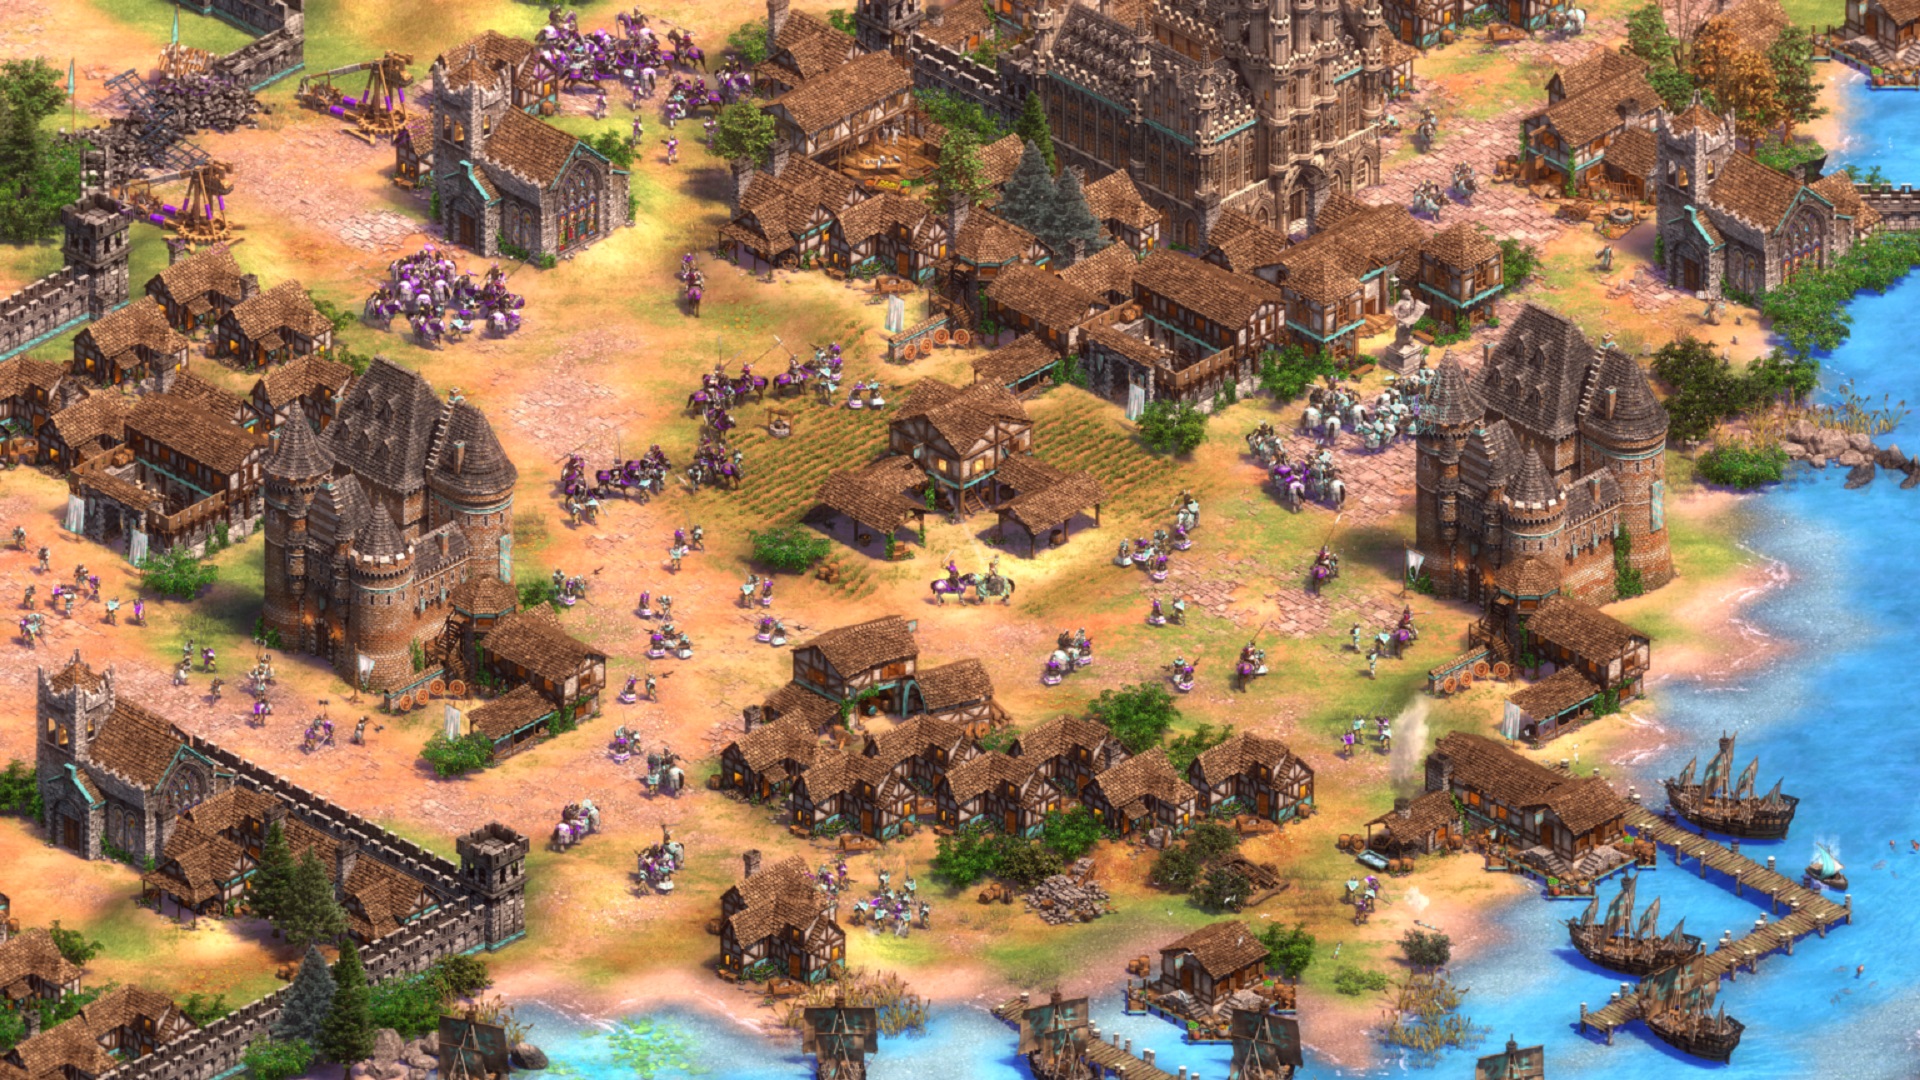 Age of Empires 2: DE’s first expansion adds new civs and campaigns